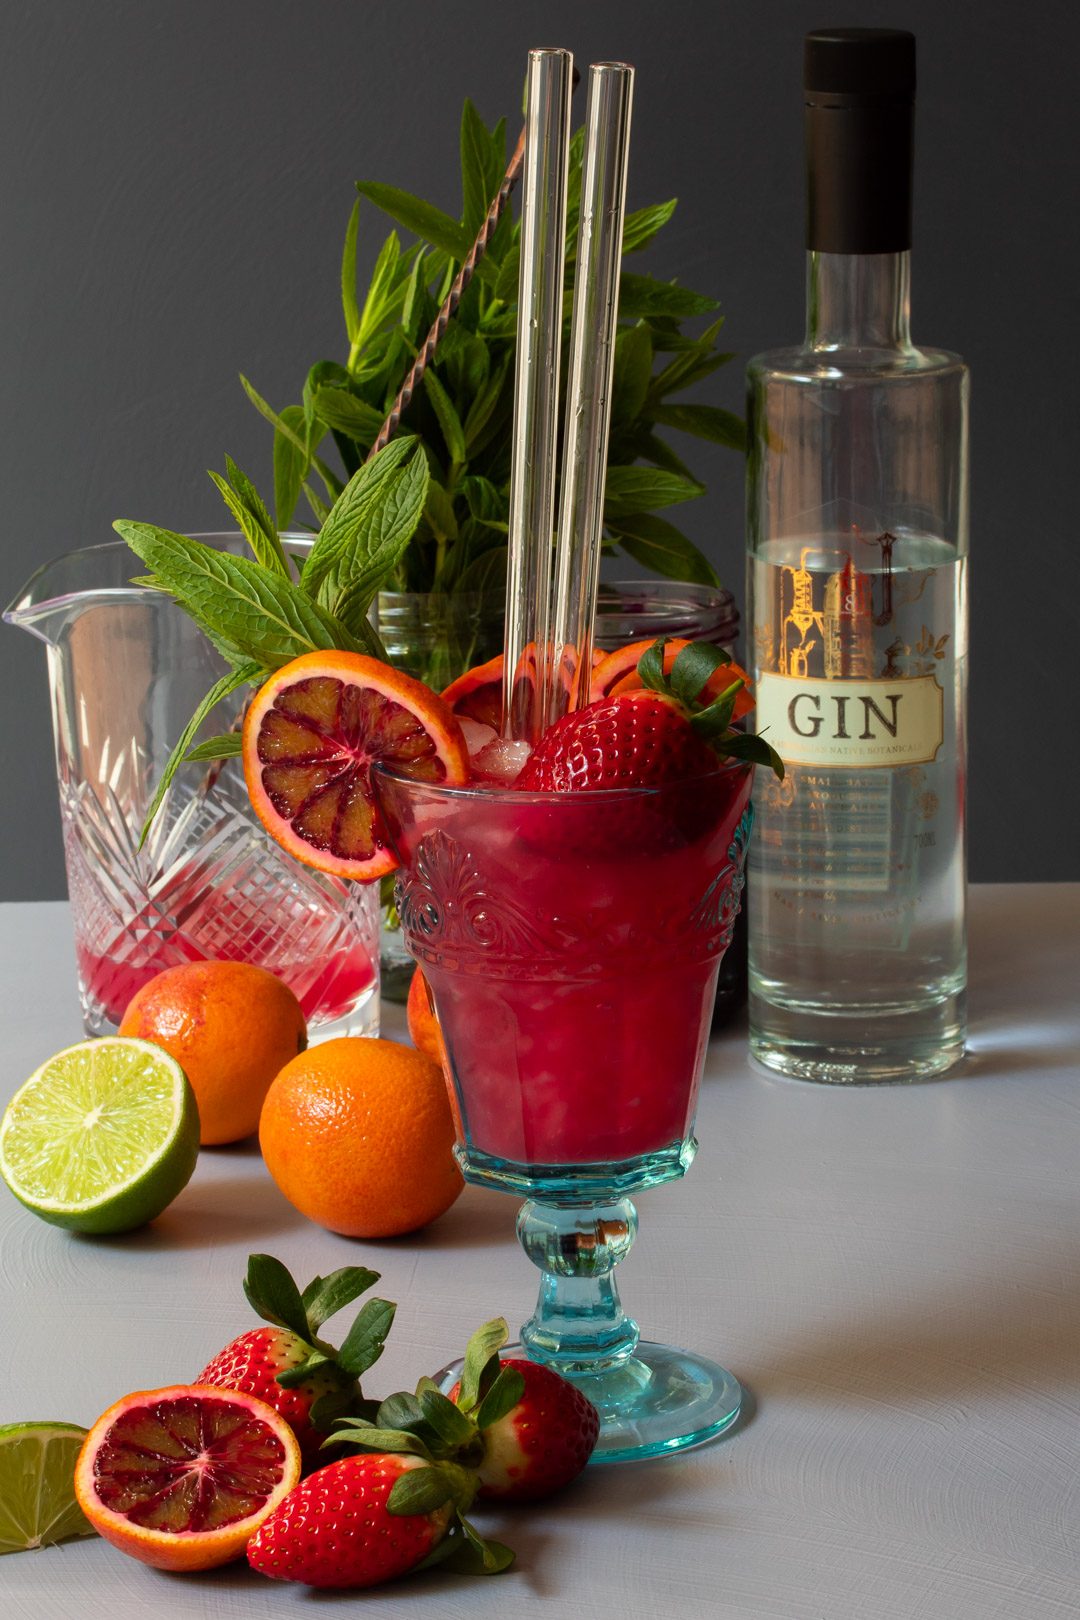 blood orange pomegranate gin daisy cocktail with mixing glass, fresh fruit, gin bottle, mint from 45 degrees